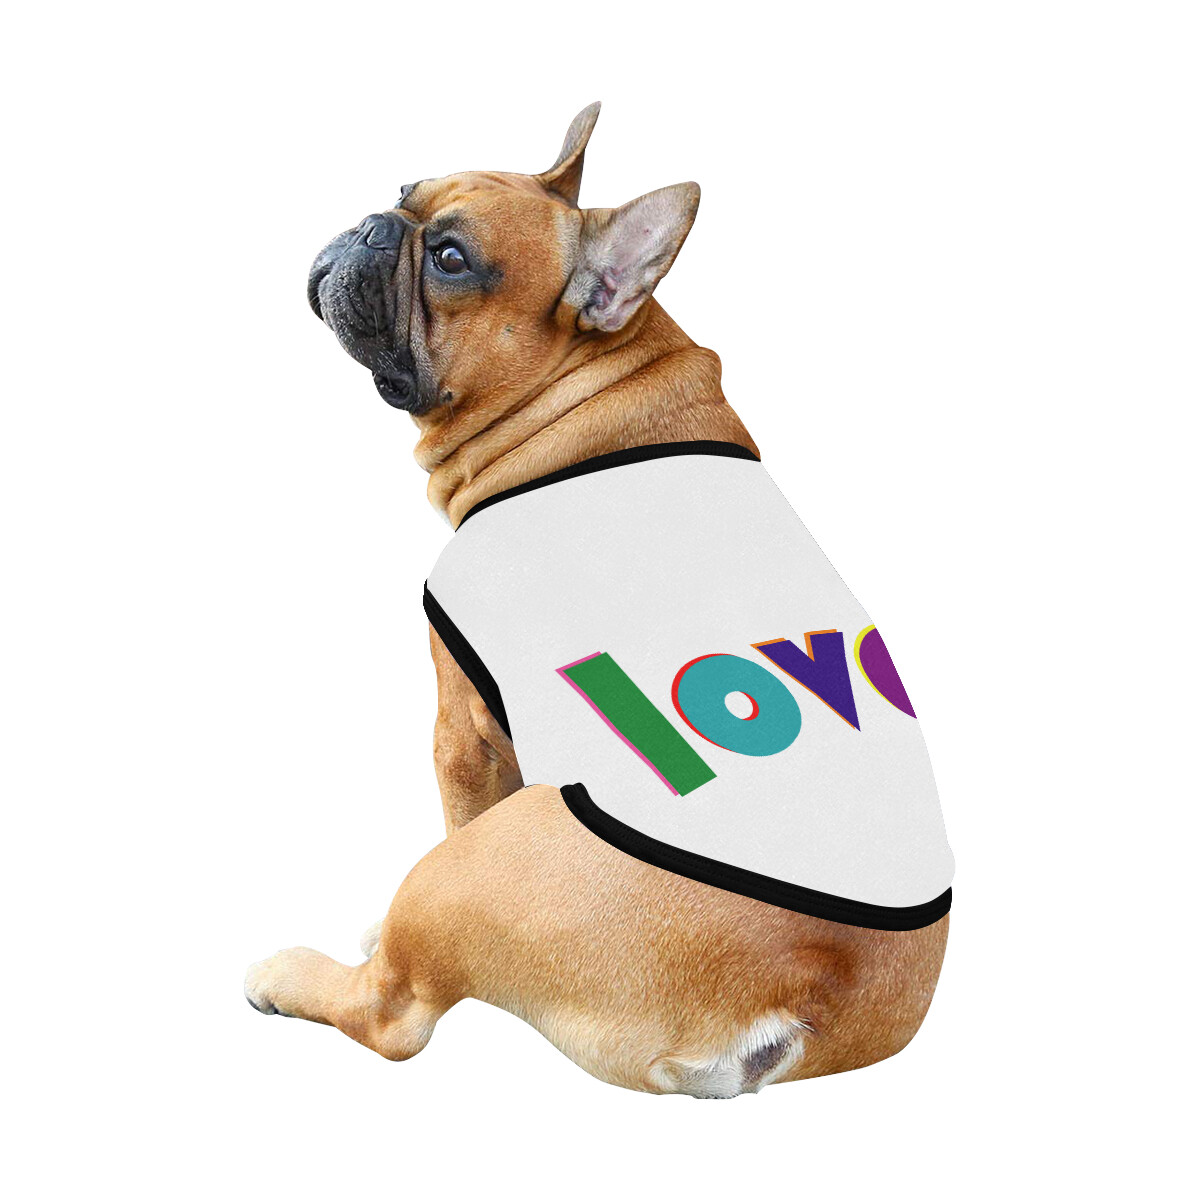 🐕 Love Dog shirt, Dog Tank Top, Dog t-shirt, Dog clothes, Gifts, front back print, 7 sizes XS to 3XL, dog gifts, white